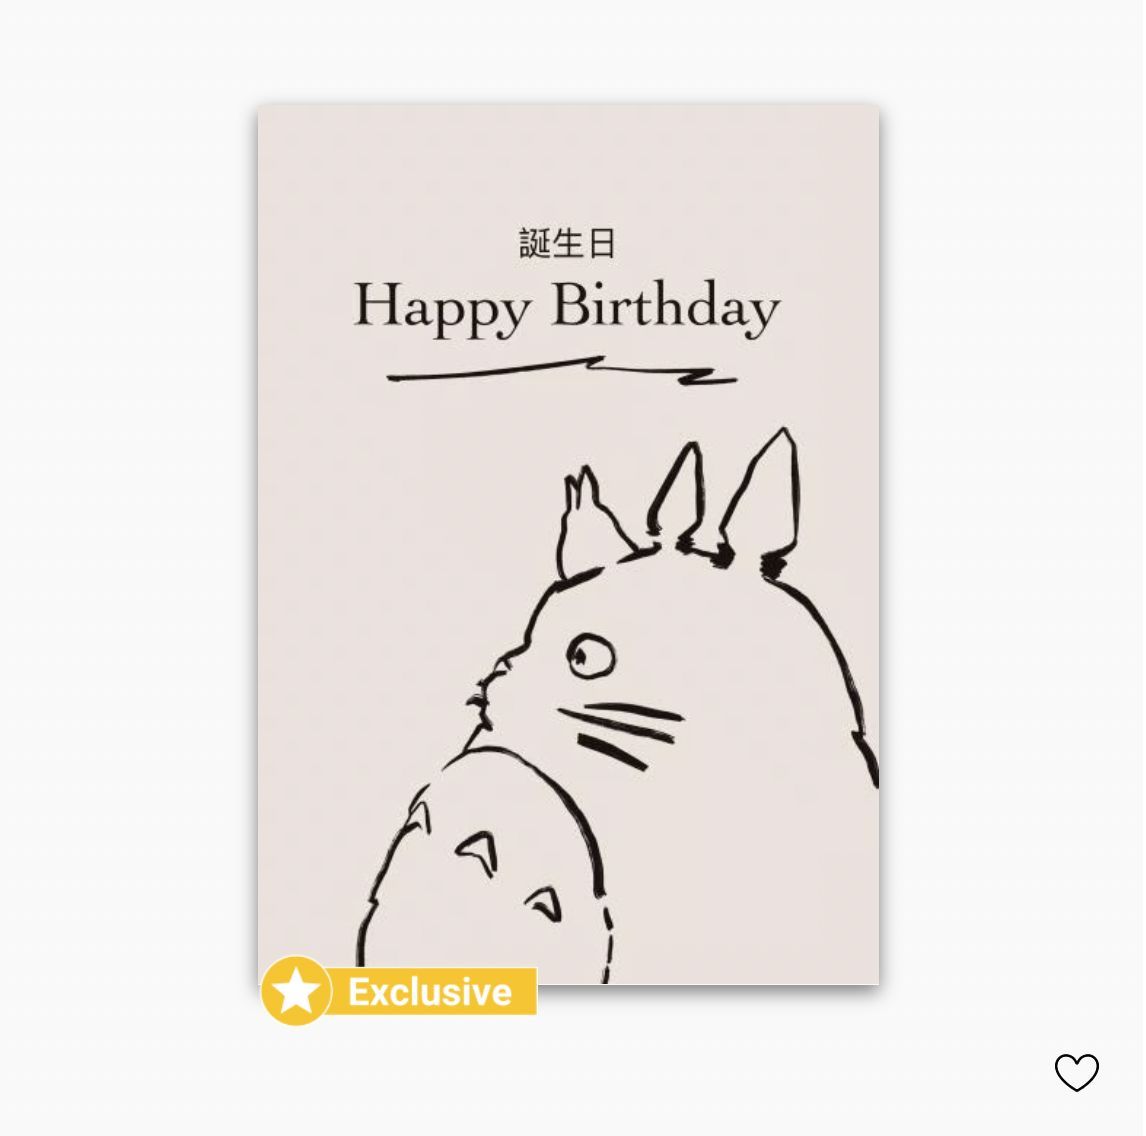 Need an #anime themed #birthdaycard? 🎂 Check out my card design over on Thortful! 😍 With a bunch of card and gift options and fast delivery, shopping for greeting cards has never been easier with Thortful! buff.ly/4aDtagk